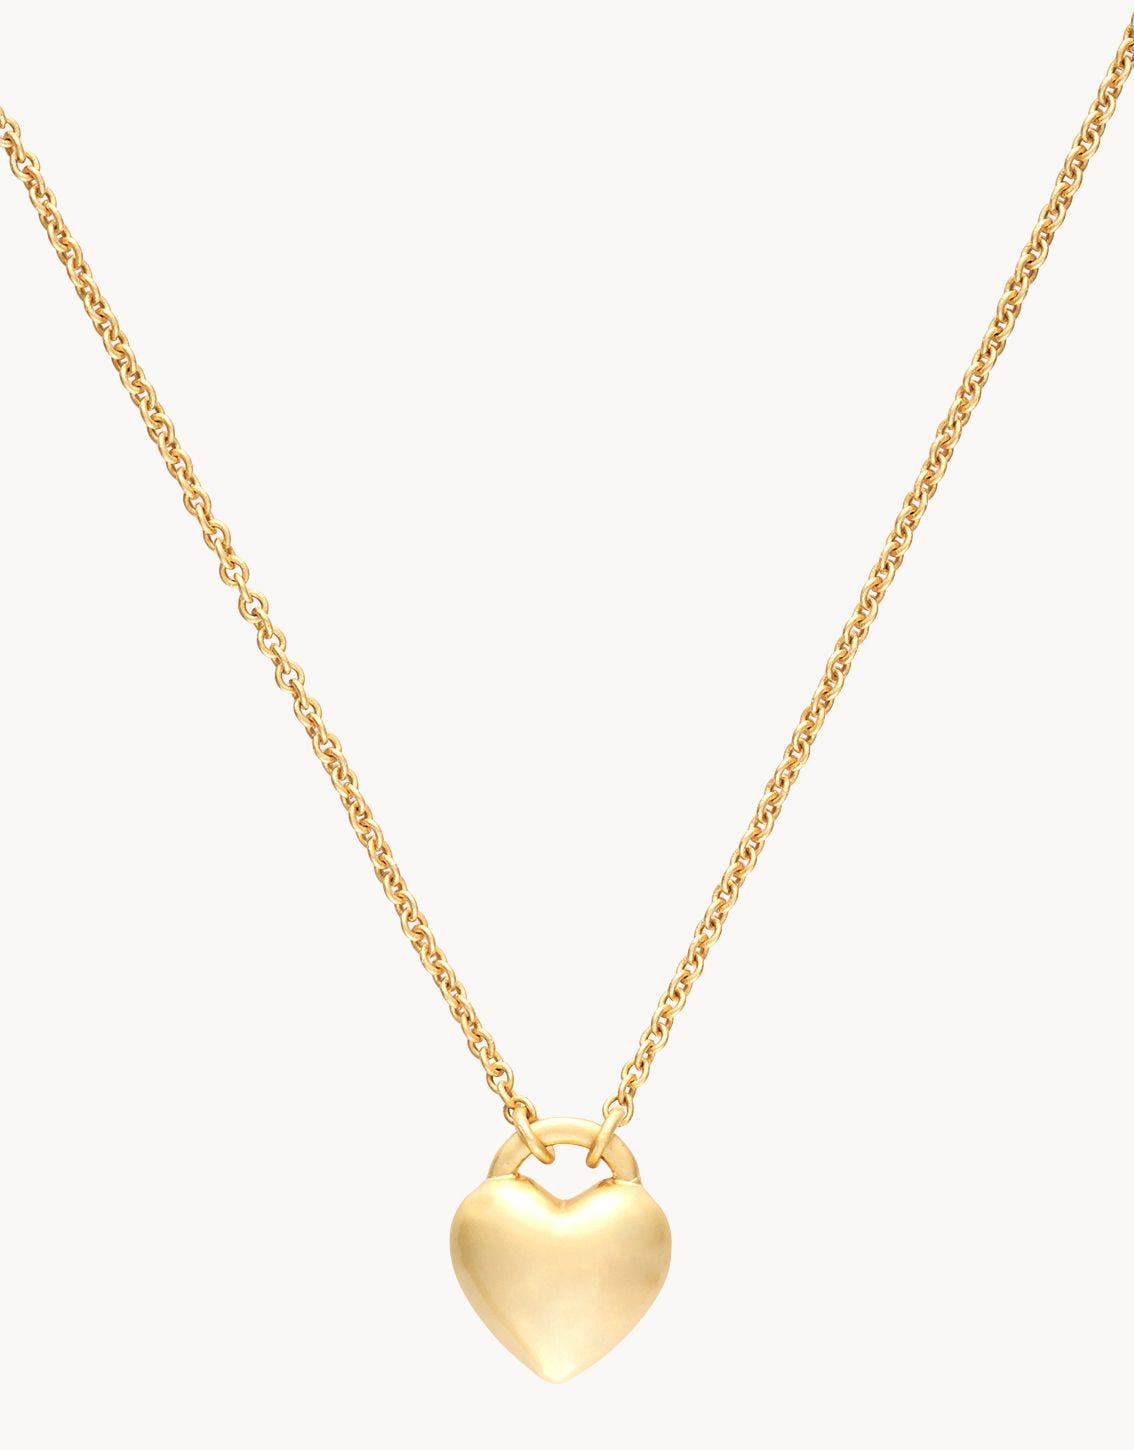 Love Heart Gold Necklace - Jewelry - SierraLily